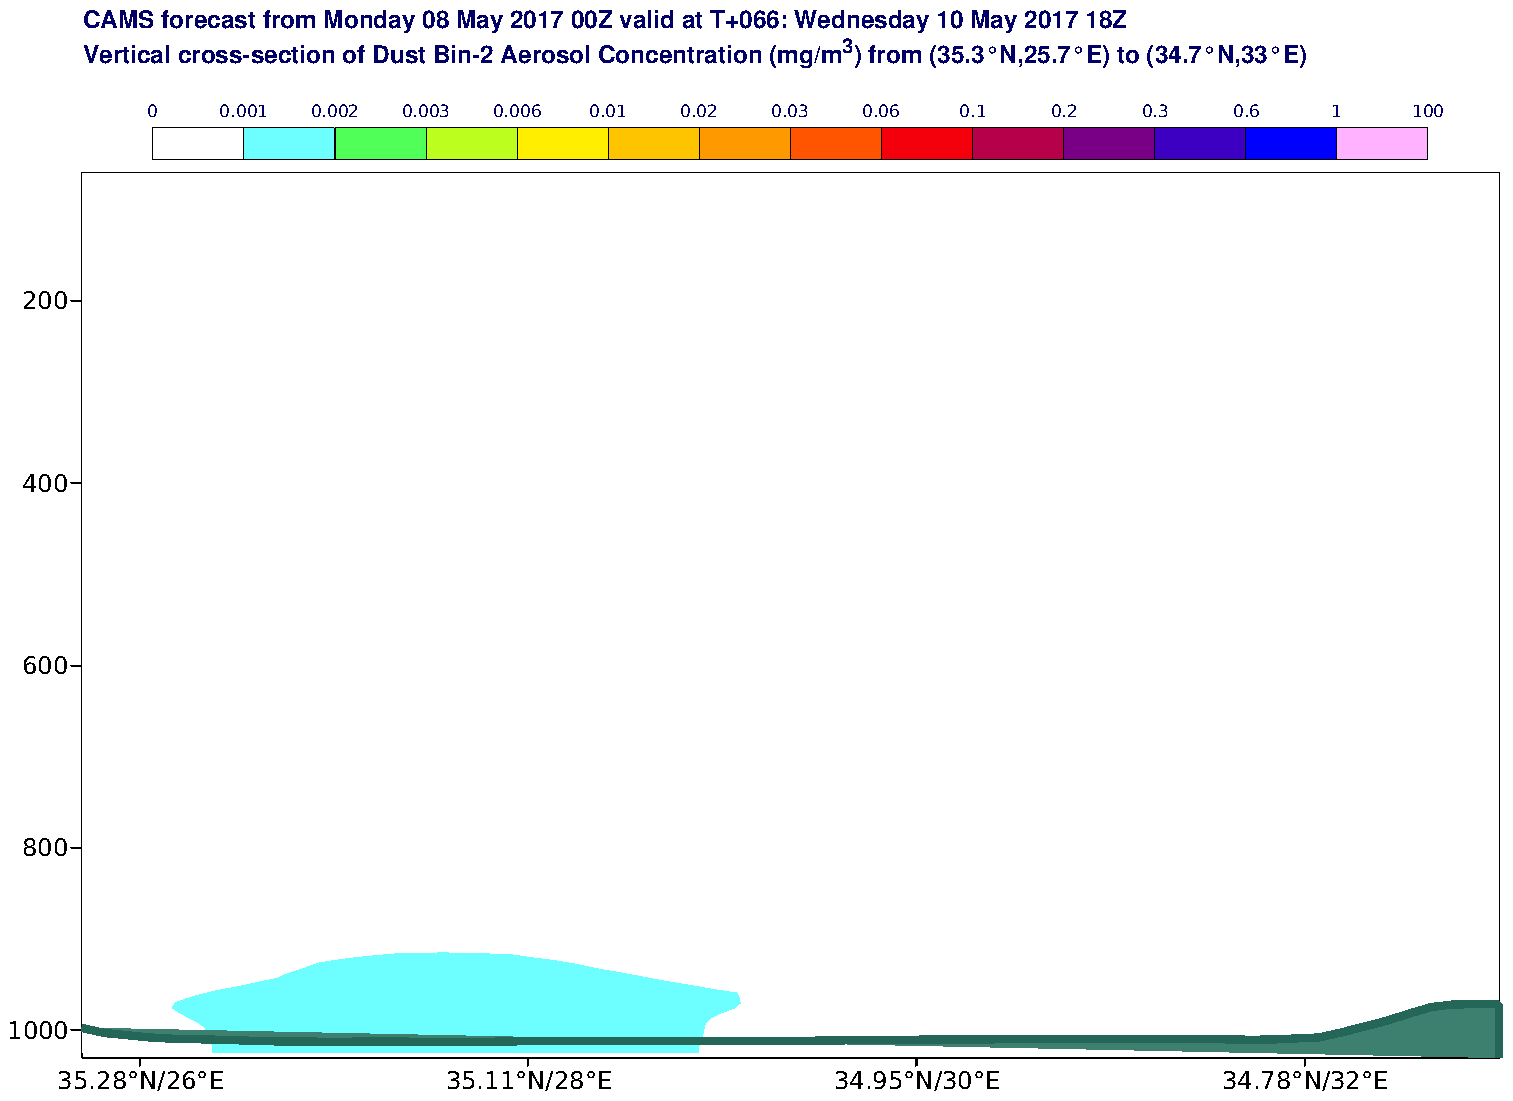 Vertical cross-section of Dust Bin-2 Aerosol Concentration (mg/m3) valid at T66 - 2017-05-10 18:00